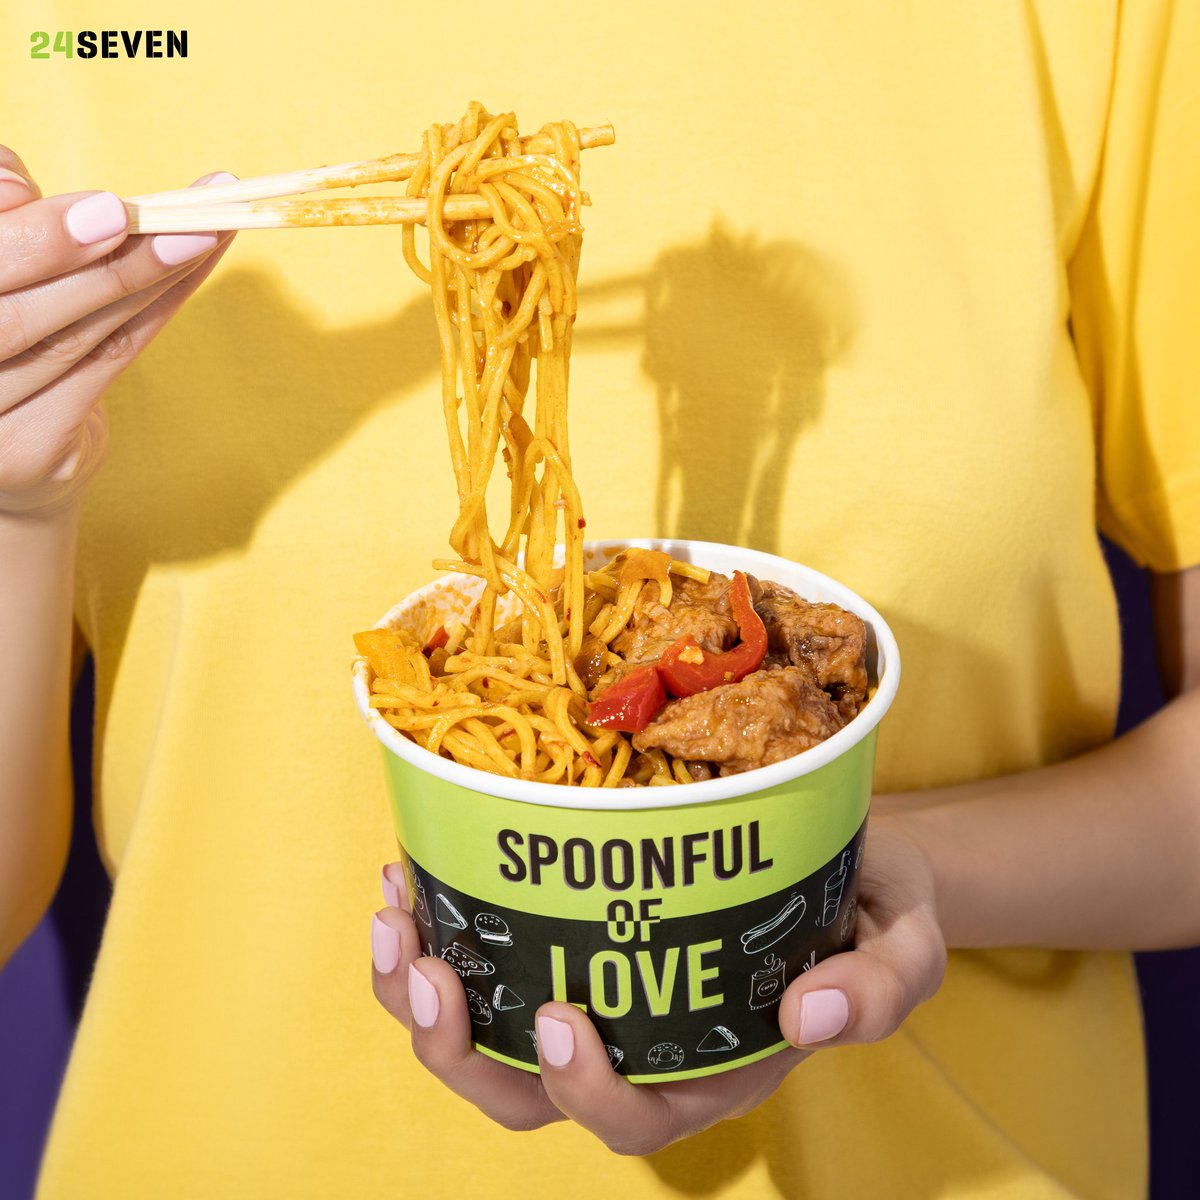 (N)oodles of flavours in every bite! Grab your Spoonful of Love today from 24Seven.😉

#24Seven #24Sevenin #Noodles #Manchurian #VegManchurian #ChickenManchurian #Food #Foodies #ManchurianLovers #24SevenStore #ConvenientHai #Visit24Seven